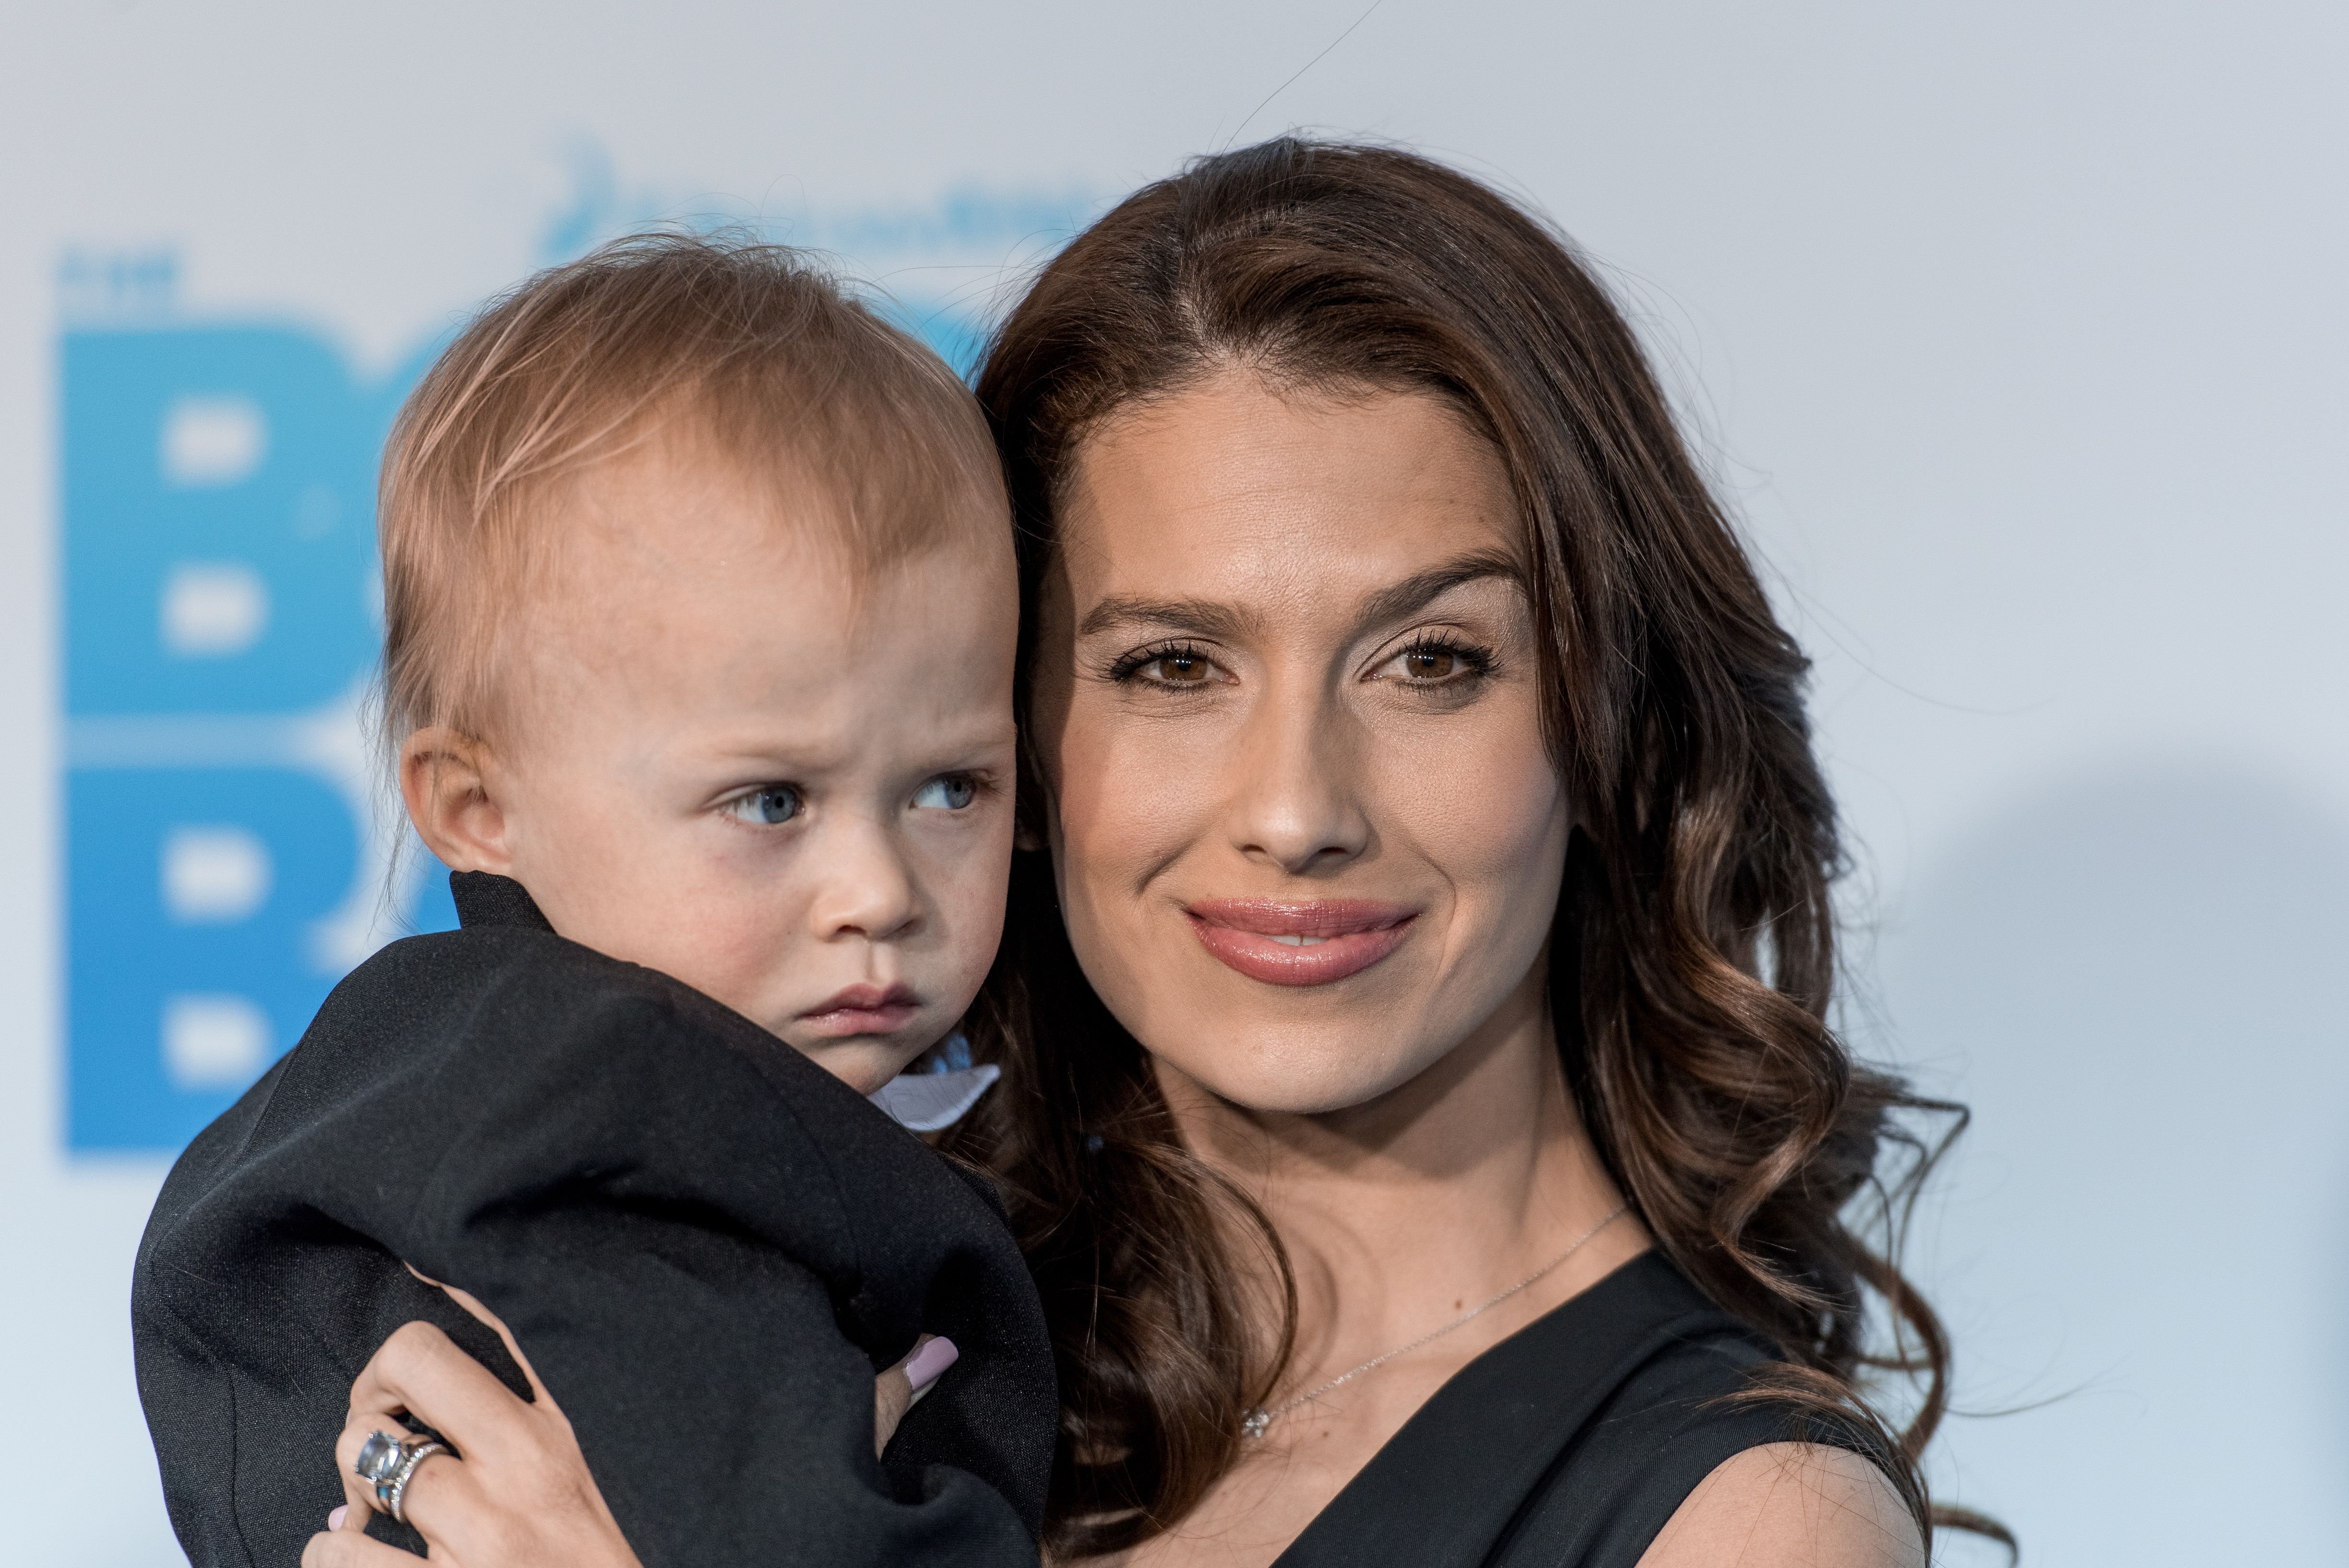 Rafael Thomas Baldwin and mom, Hilaria, during "The Boss Baby" New York Premiere at AMC Loews Lincoln Square 13 theater on March 20, 2017 in New York City. | Source: Getty Images